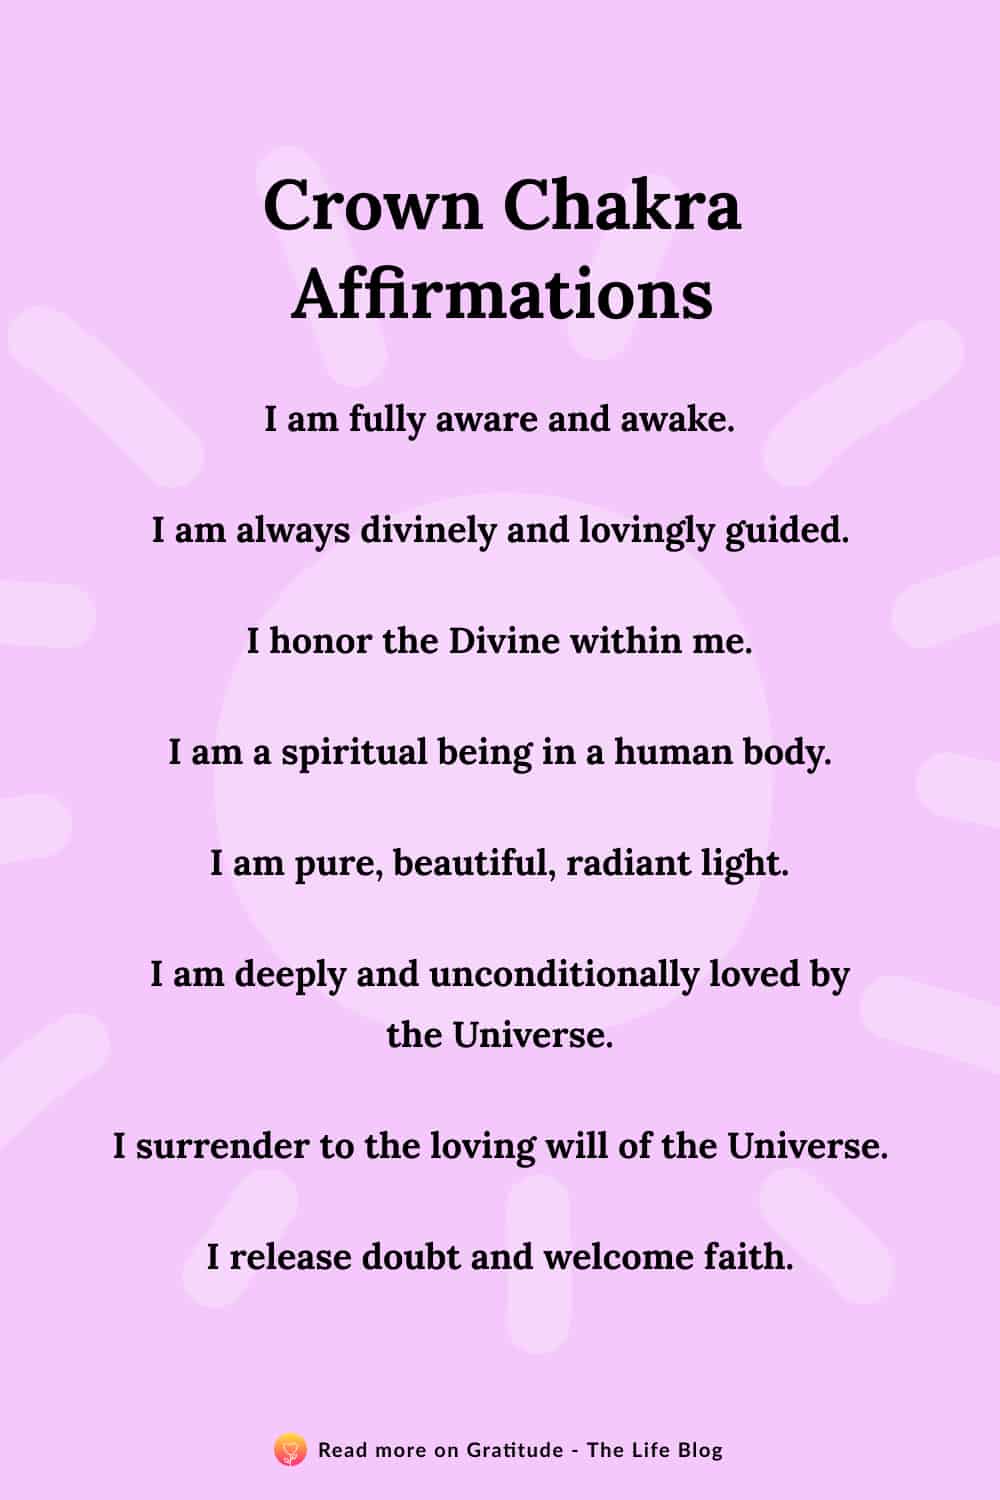 Image with list of crown chakra affirmations